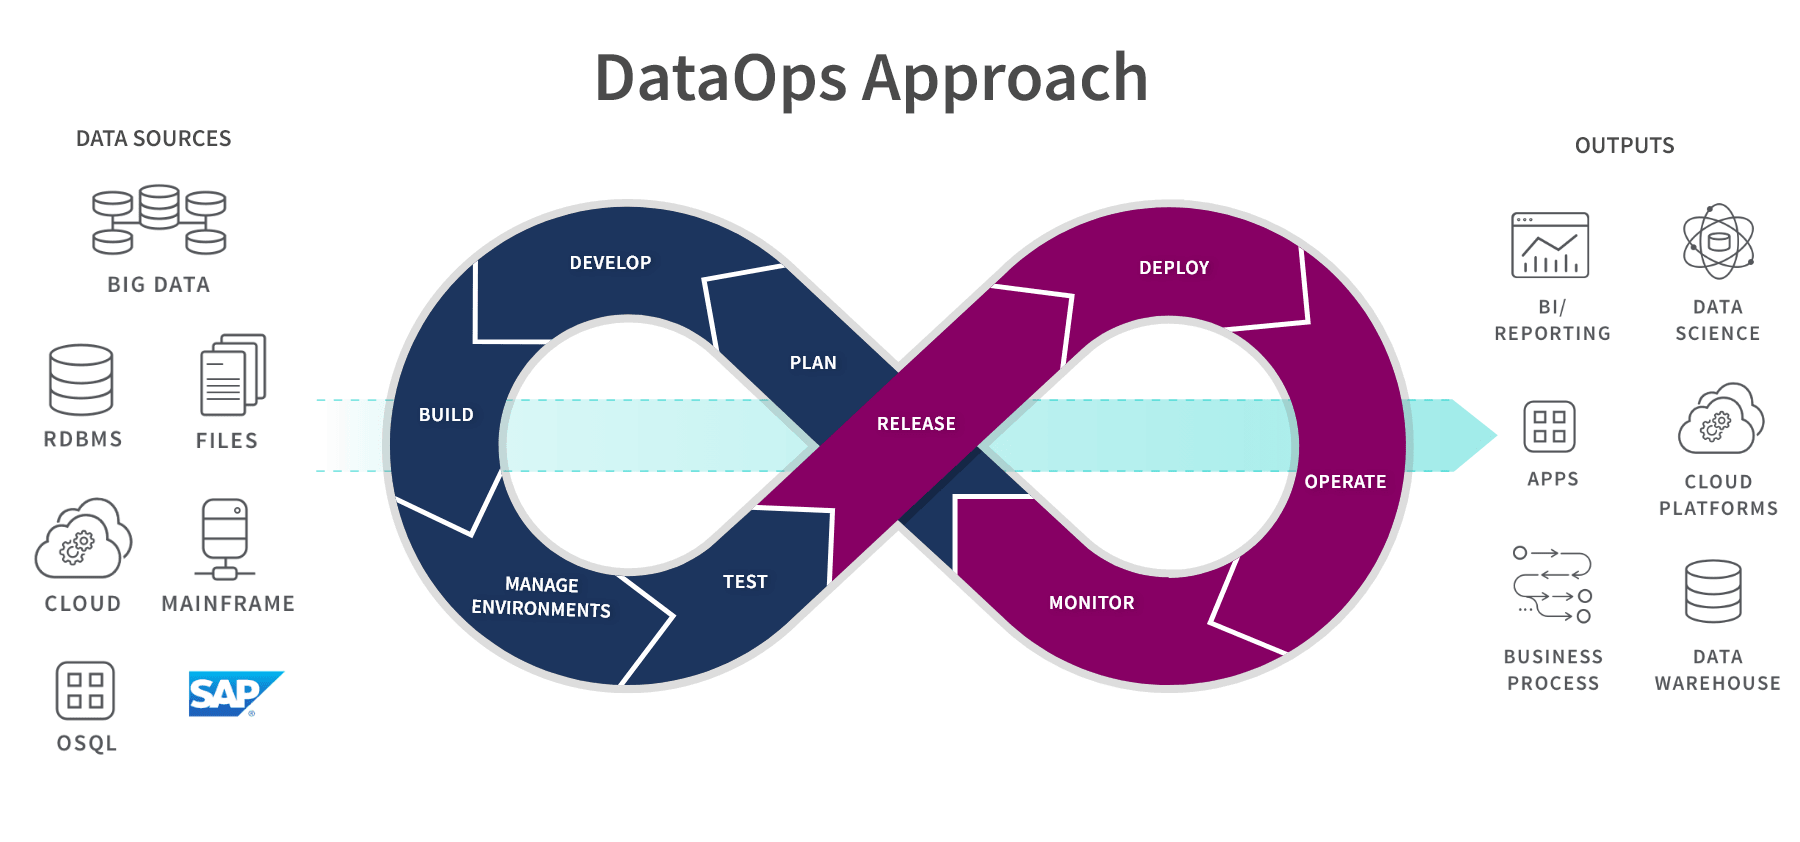 Diagram showing the steps to implement an agile DataOps process.